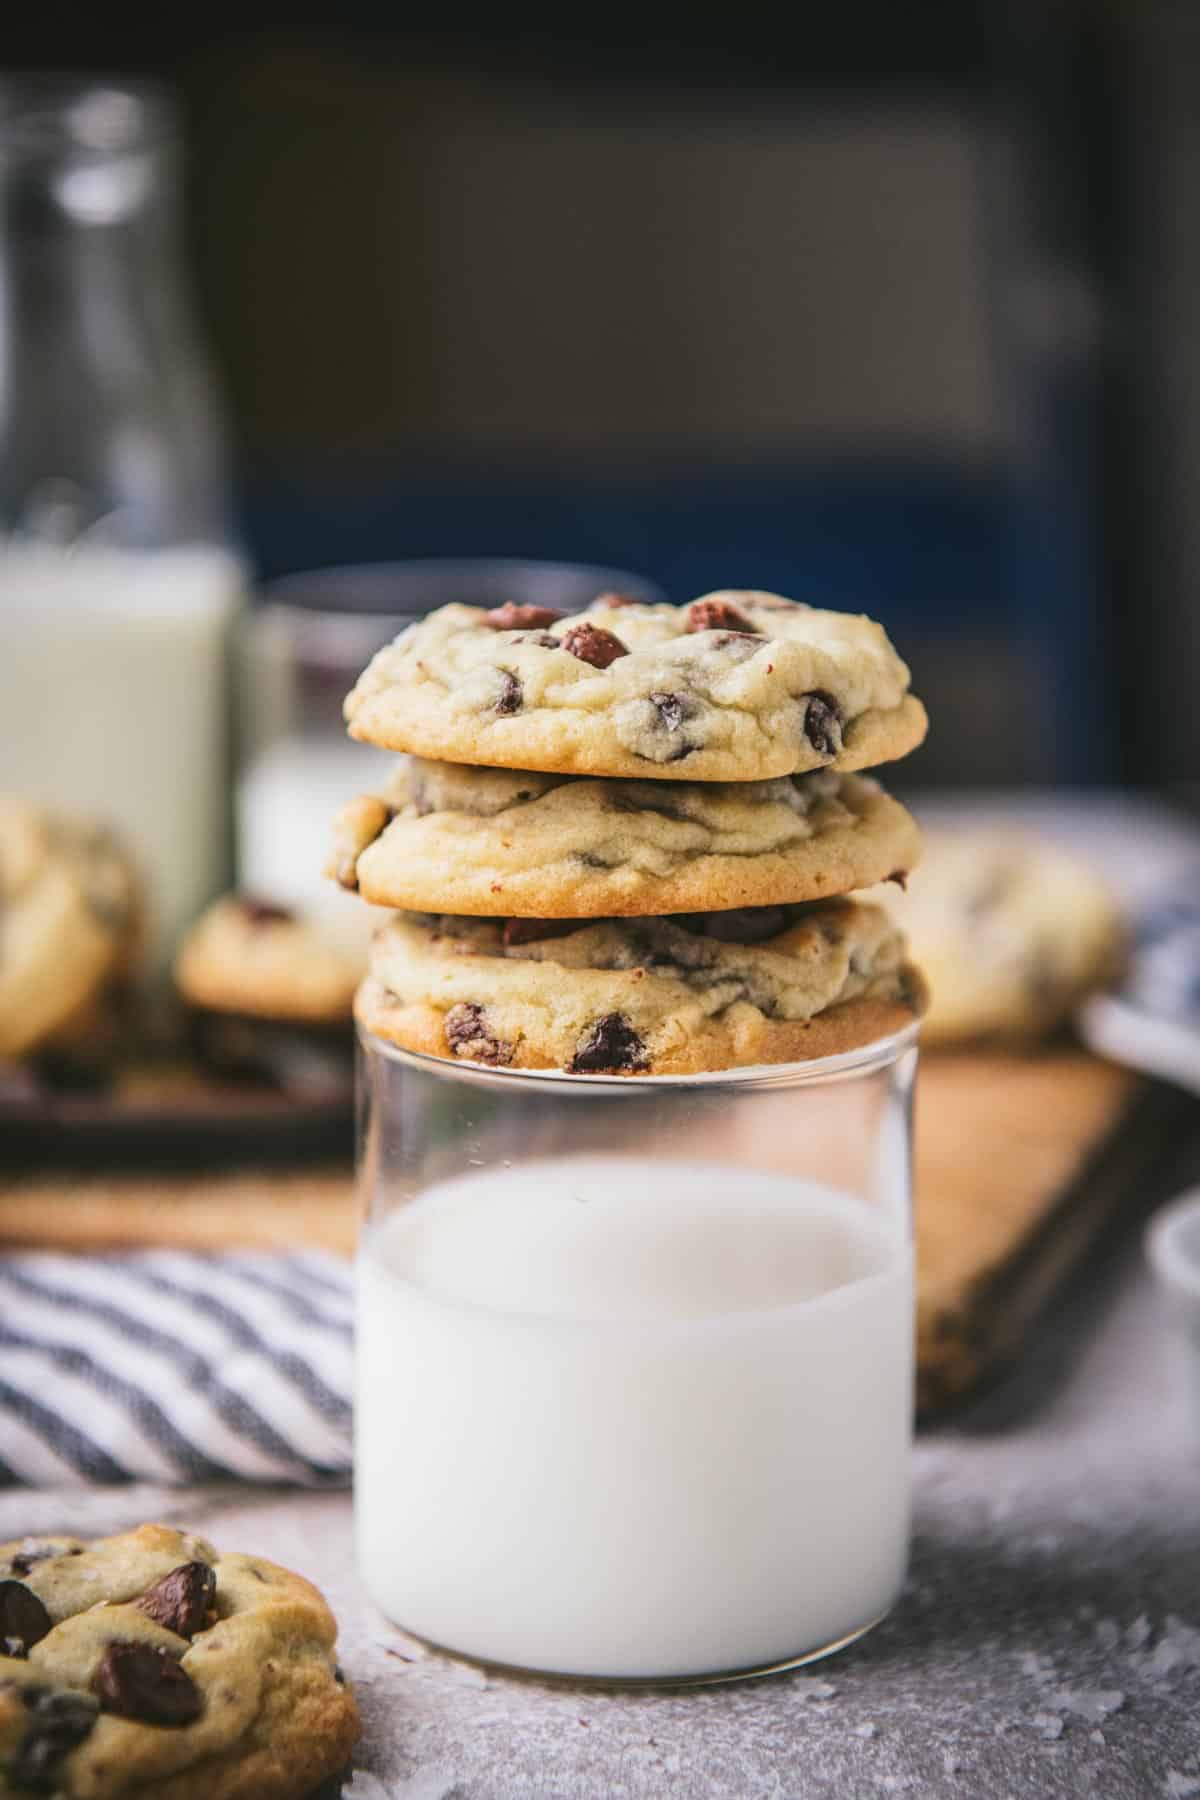 Three salted chocolate chip cookies stacked on a glass of milk.